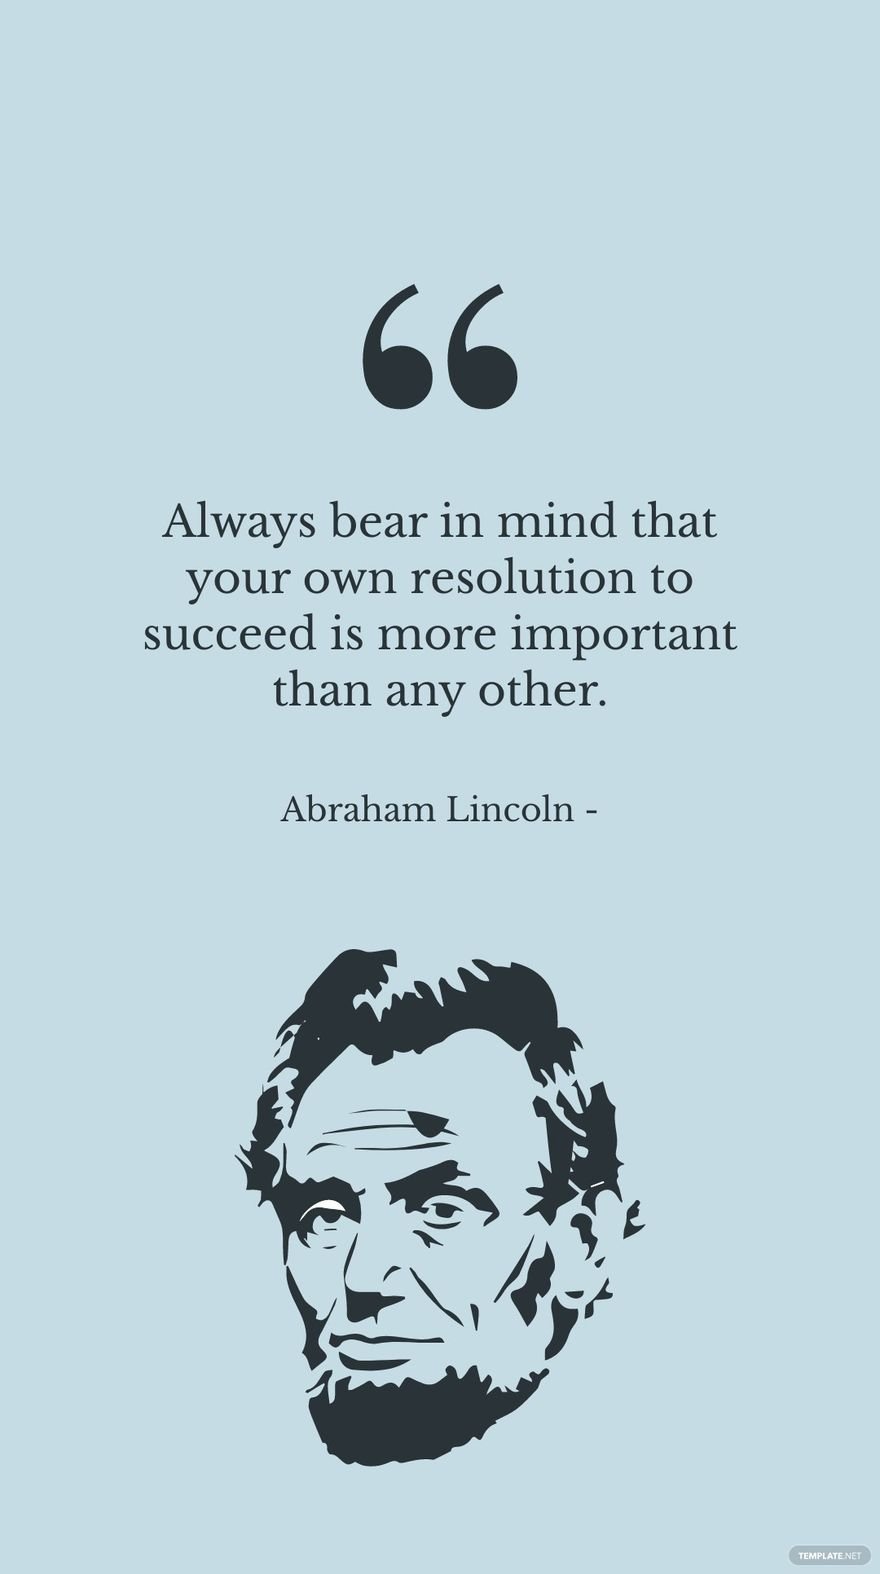 Abraham Lincoln - Always bear in mind that your own resolution to succeed is more important than any other.